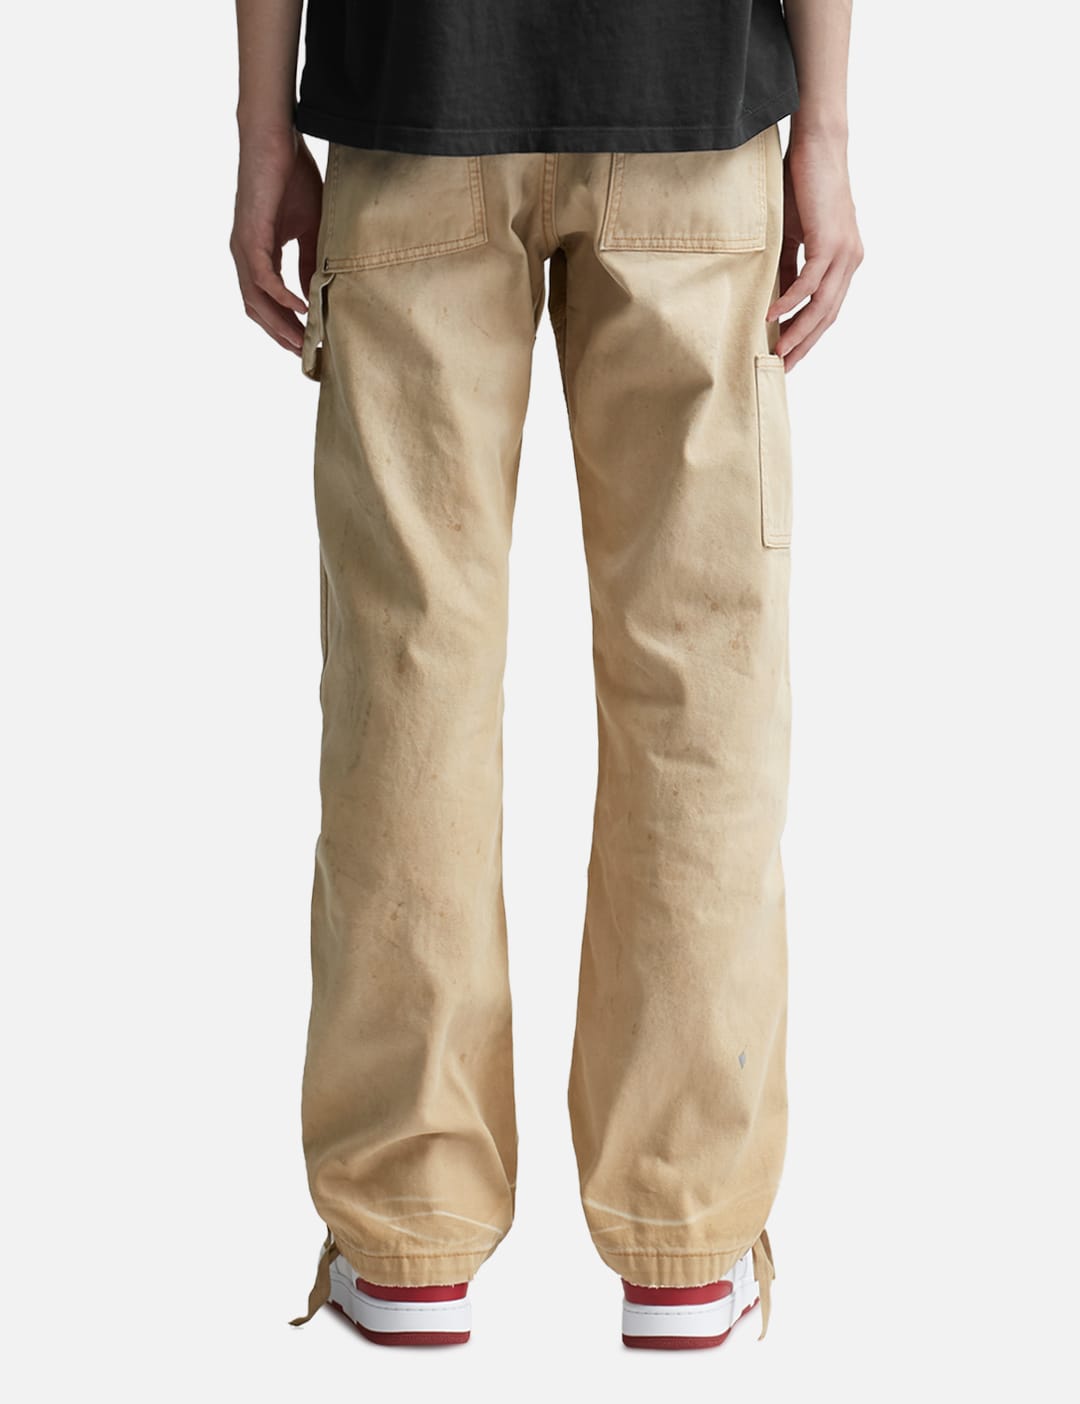 Rhude   CHEVRON PAINTER PANTS   HBX   Globally Curated Fashion and